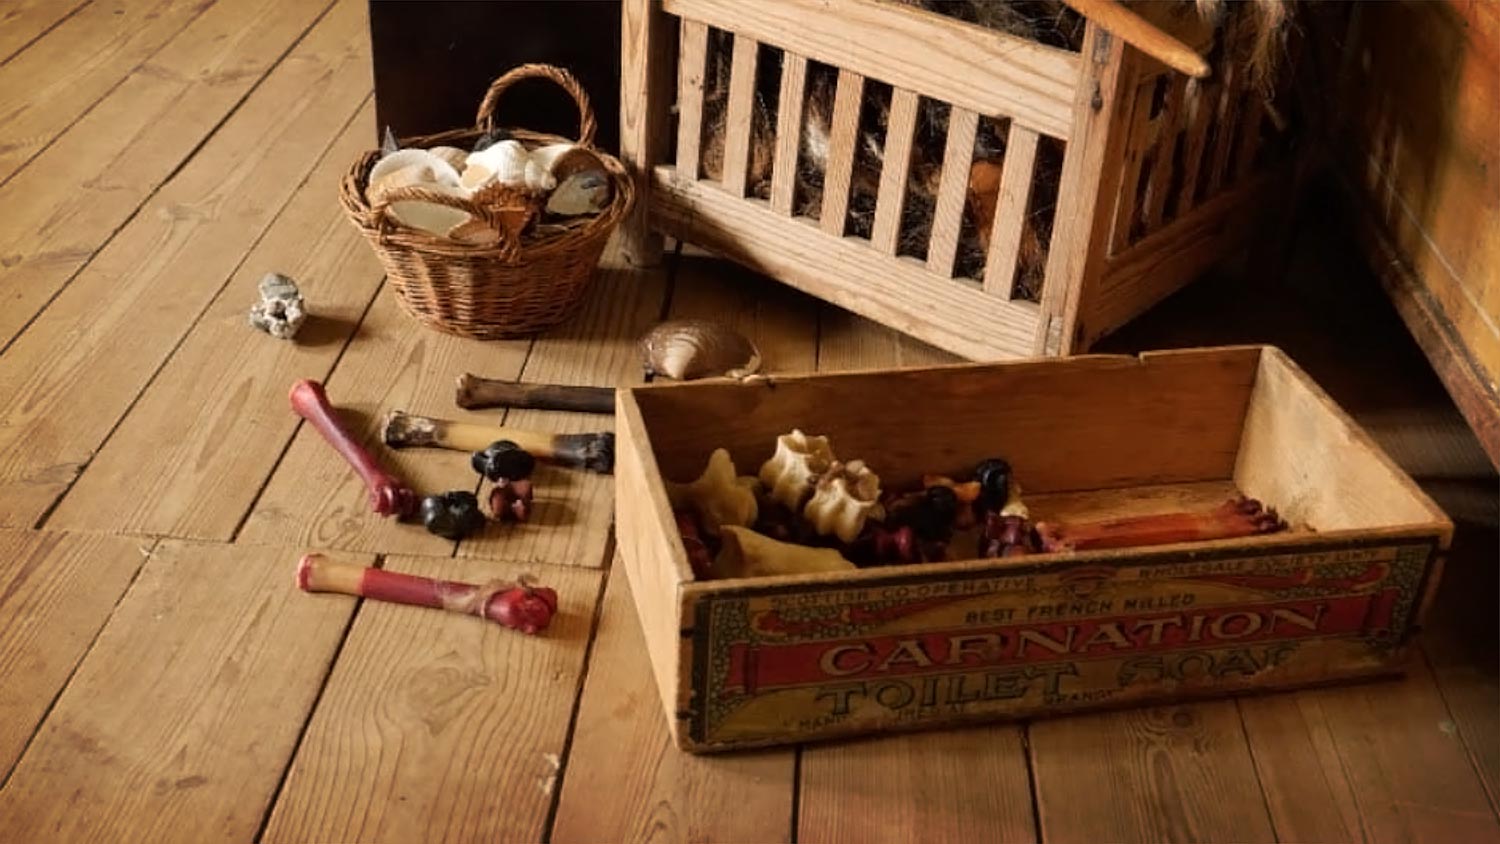 An old wooden box with old fashioned playthings, bones.